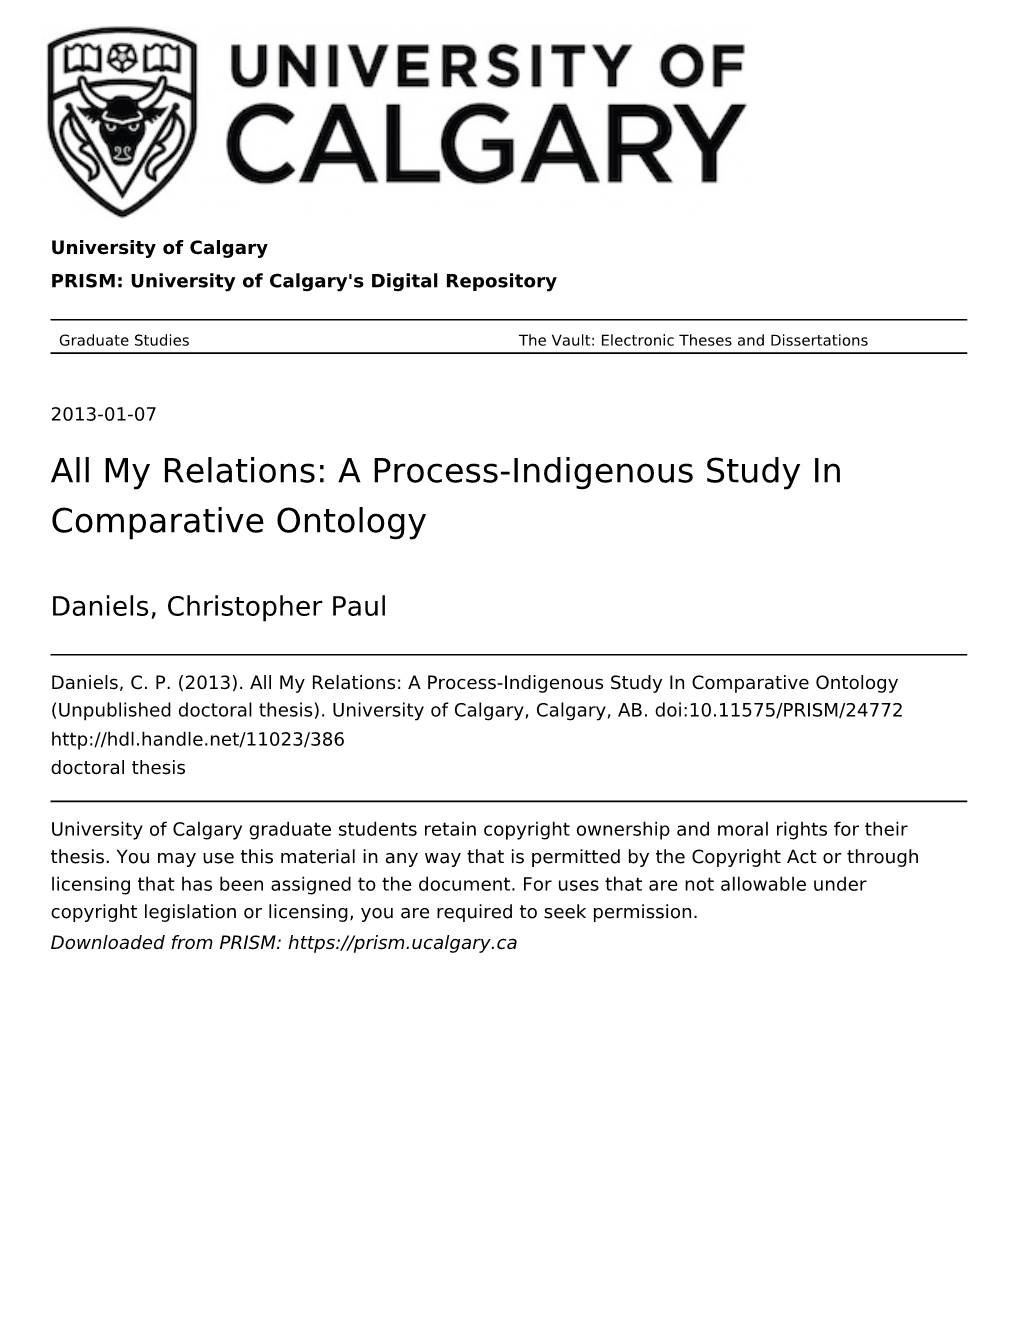 All My Relations: a Process-Indigenous Study in Comparative Ontology